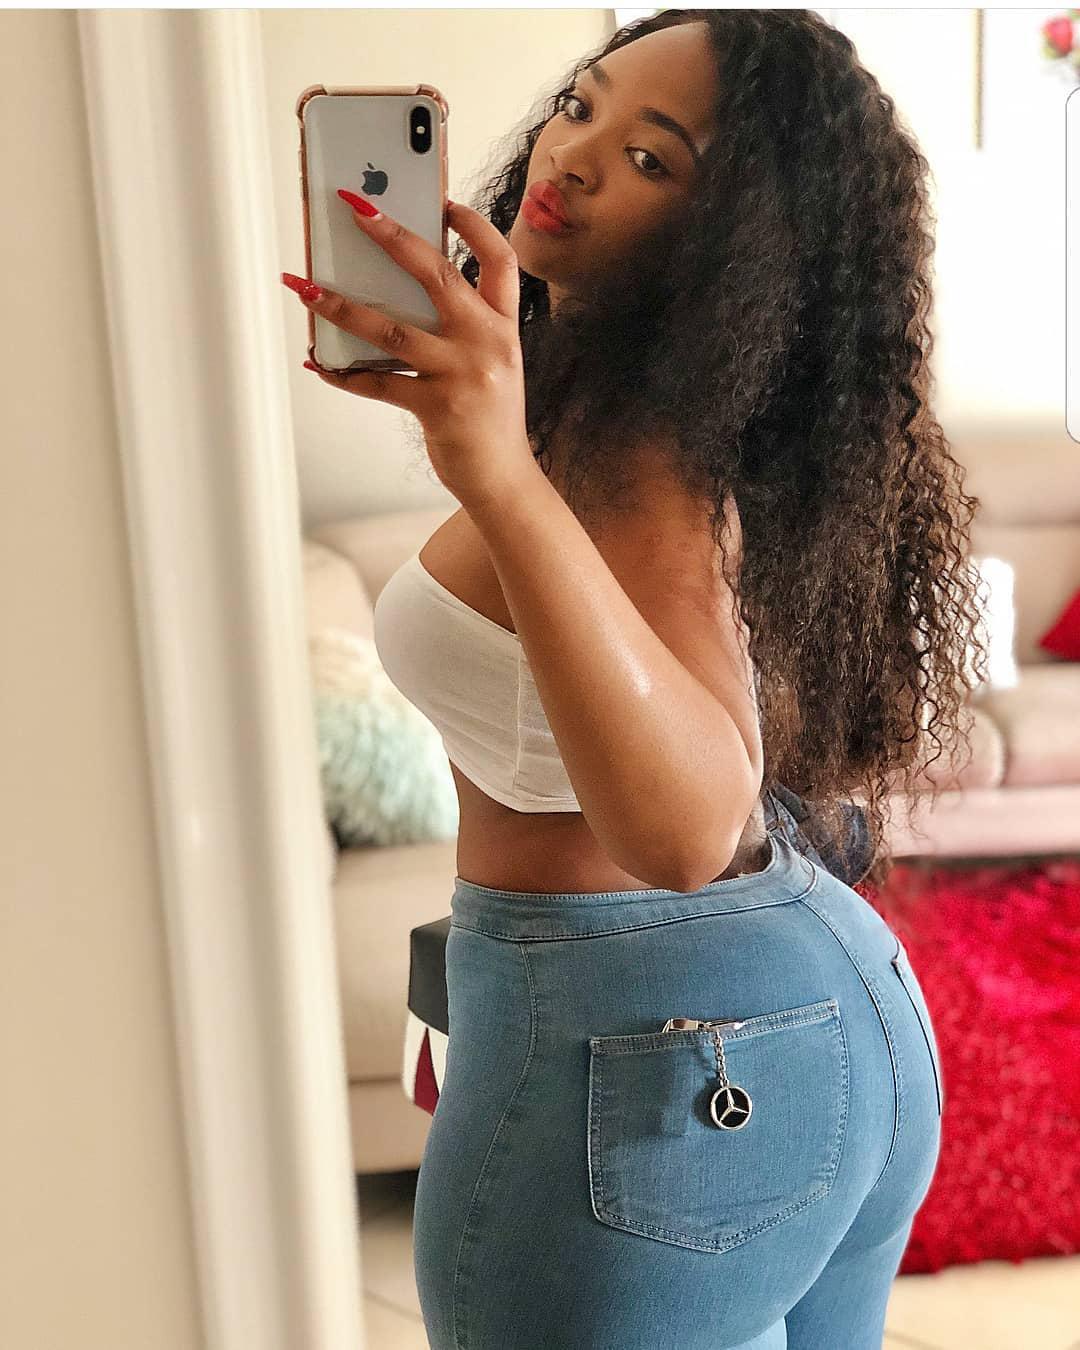 The girl wearing white top with denim pant is a symbol of today’s modern and sexy African diva.: 